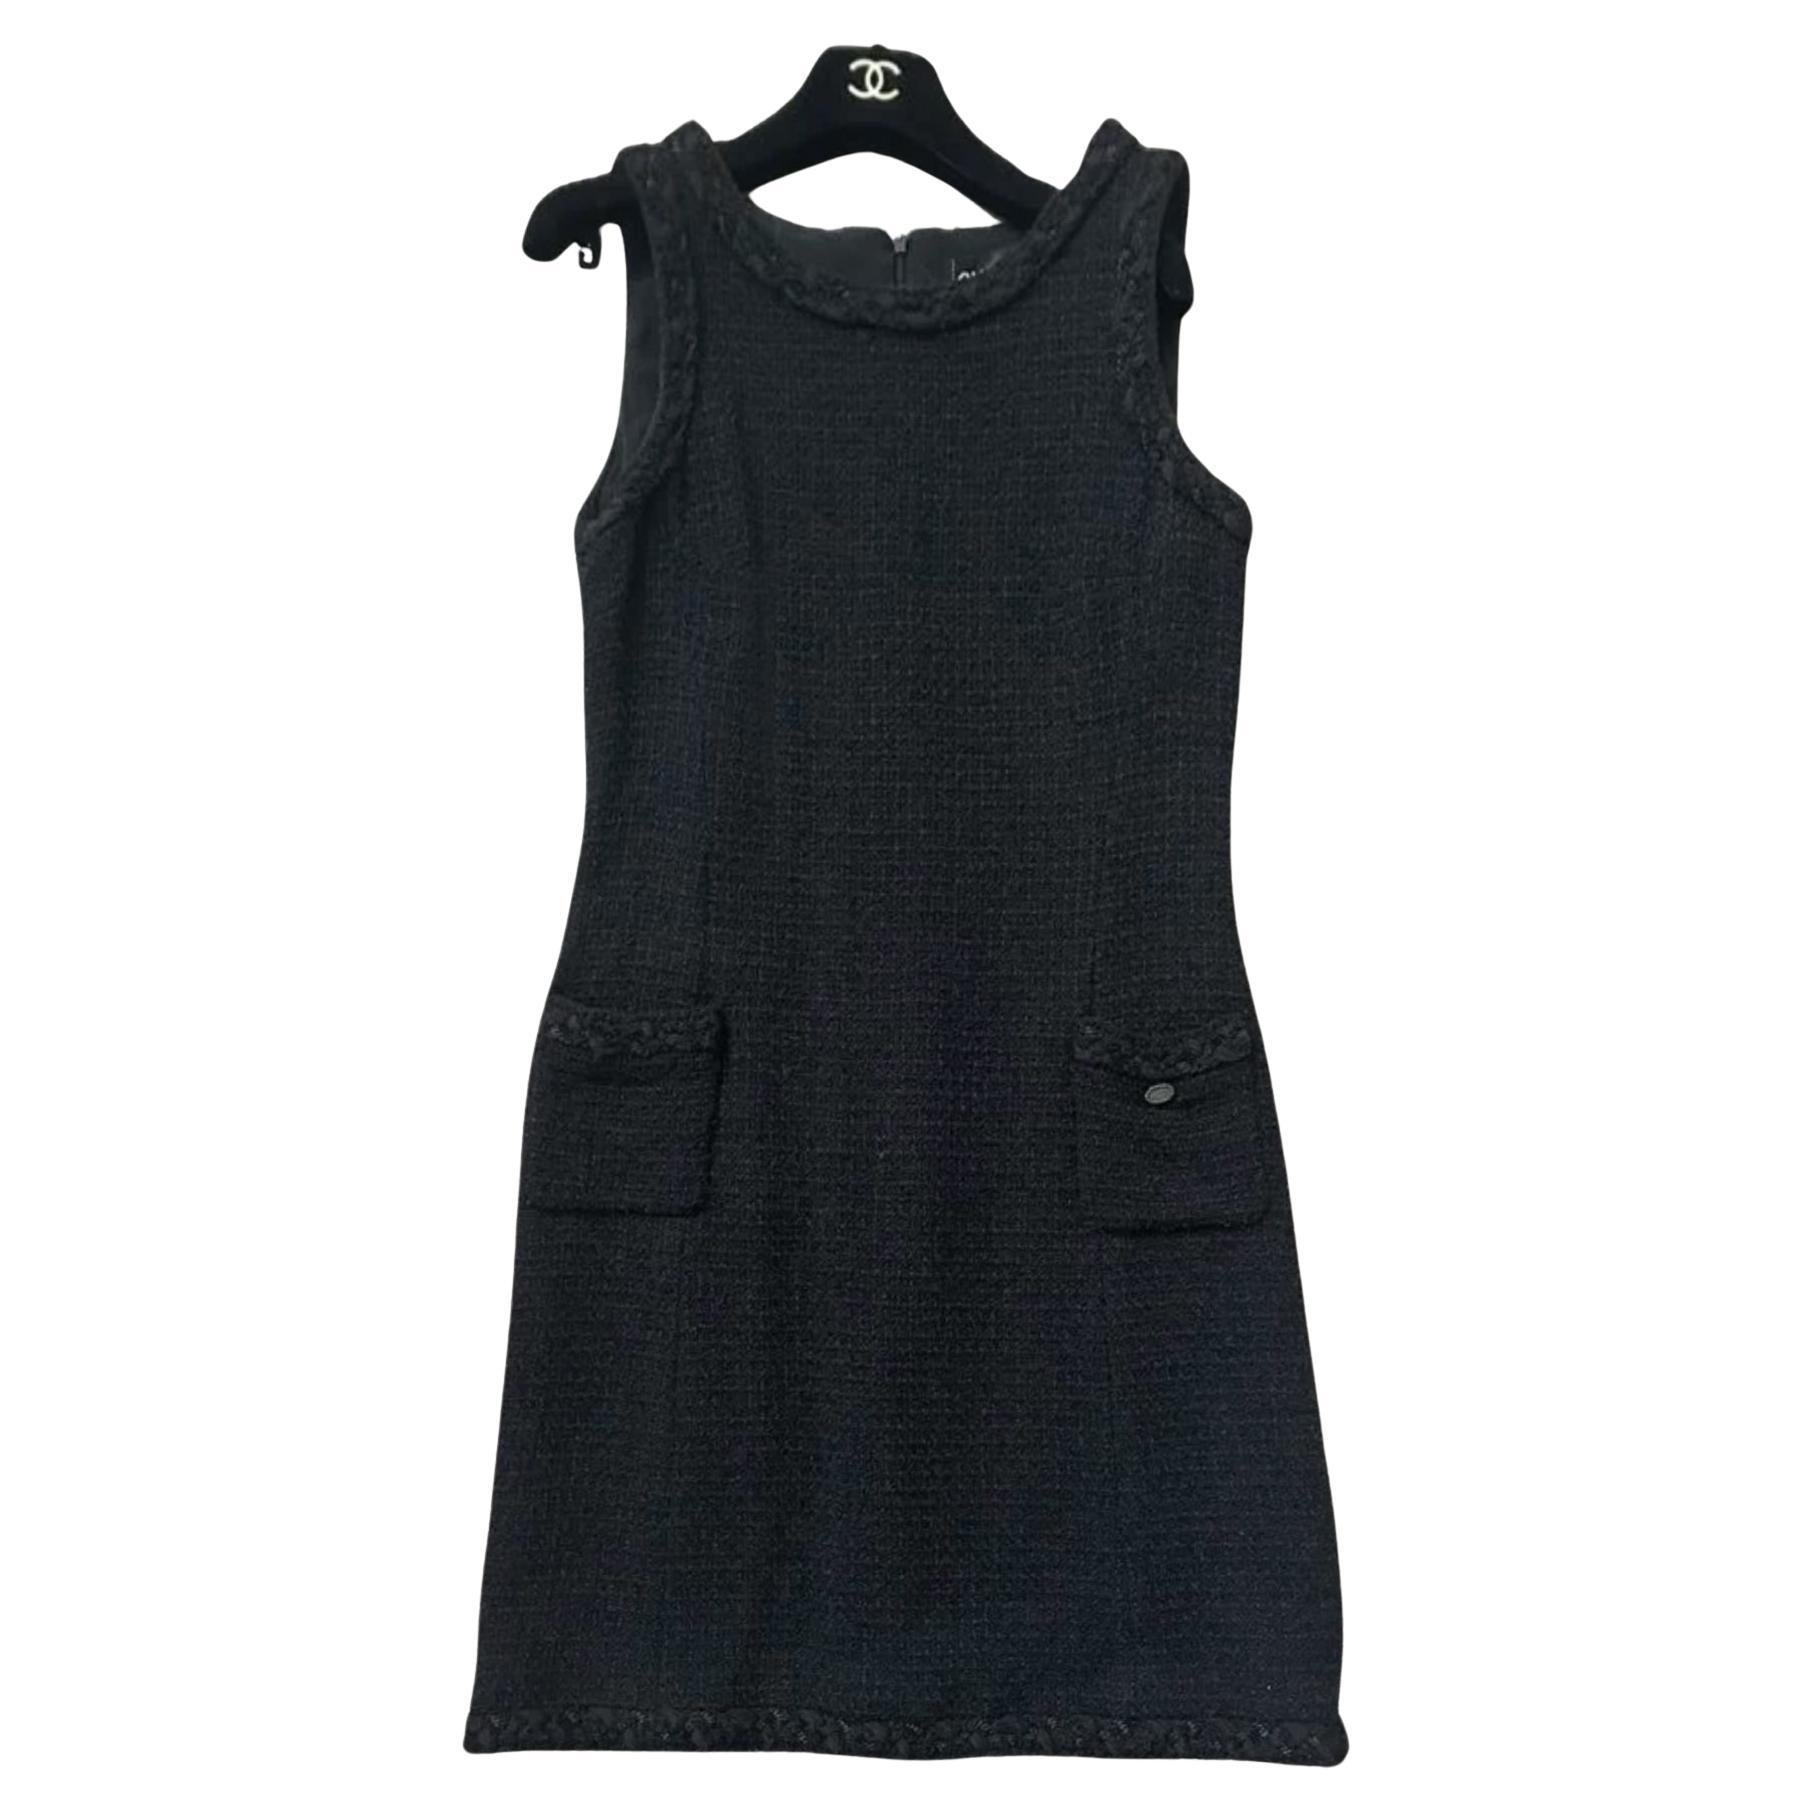 Chanel Most Iconic Little Black Dress For Sale